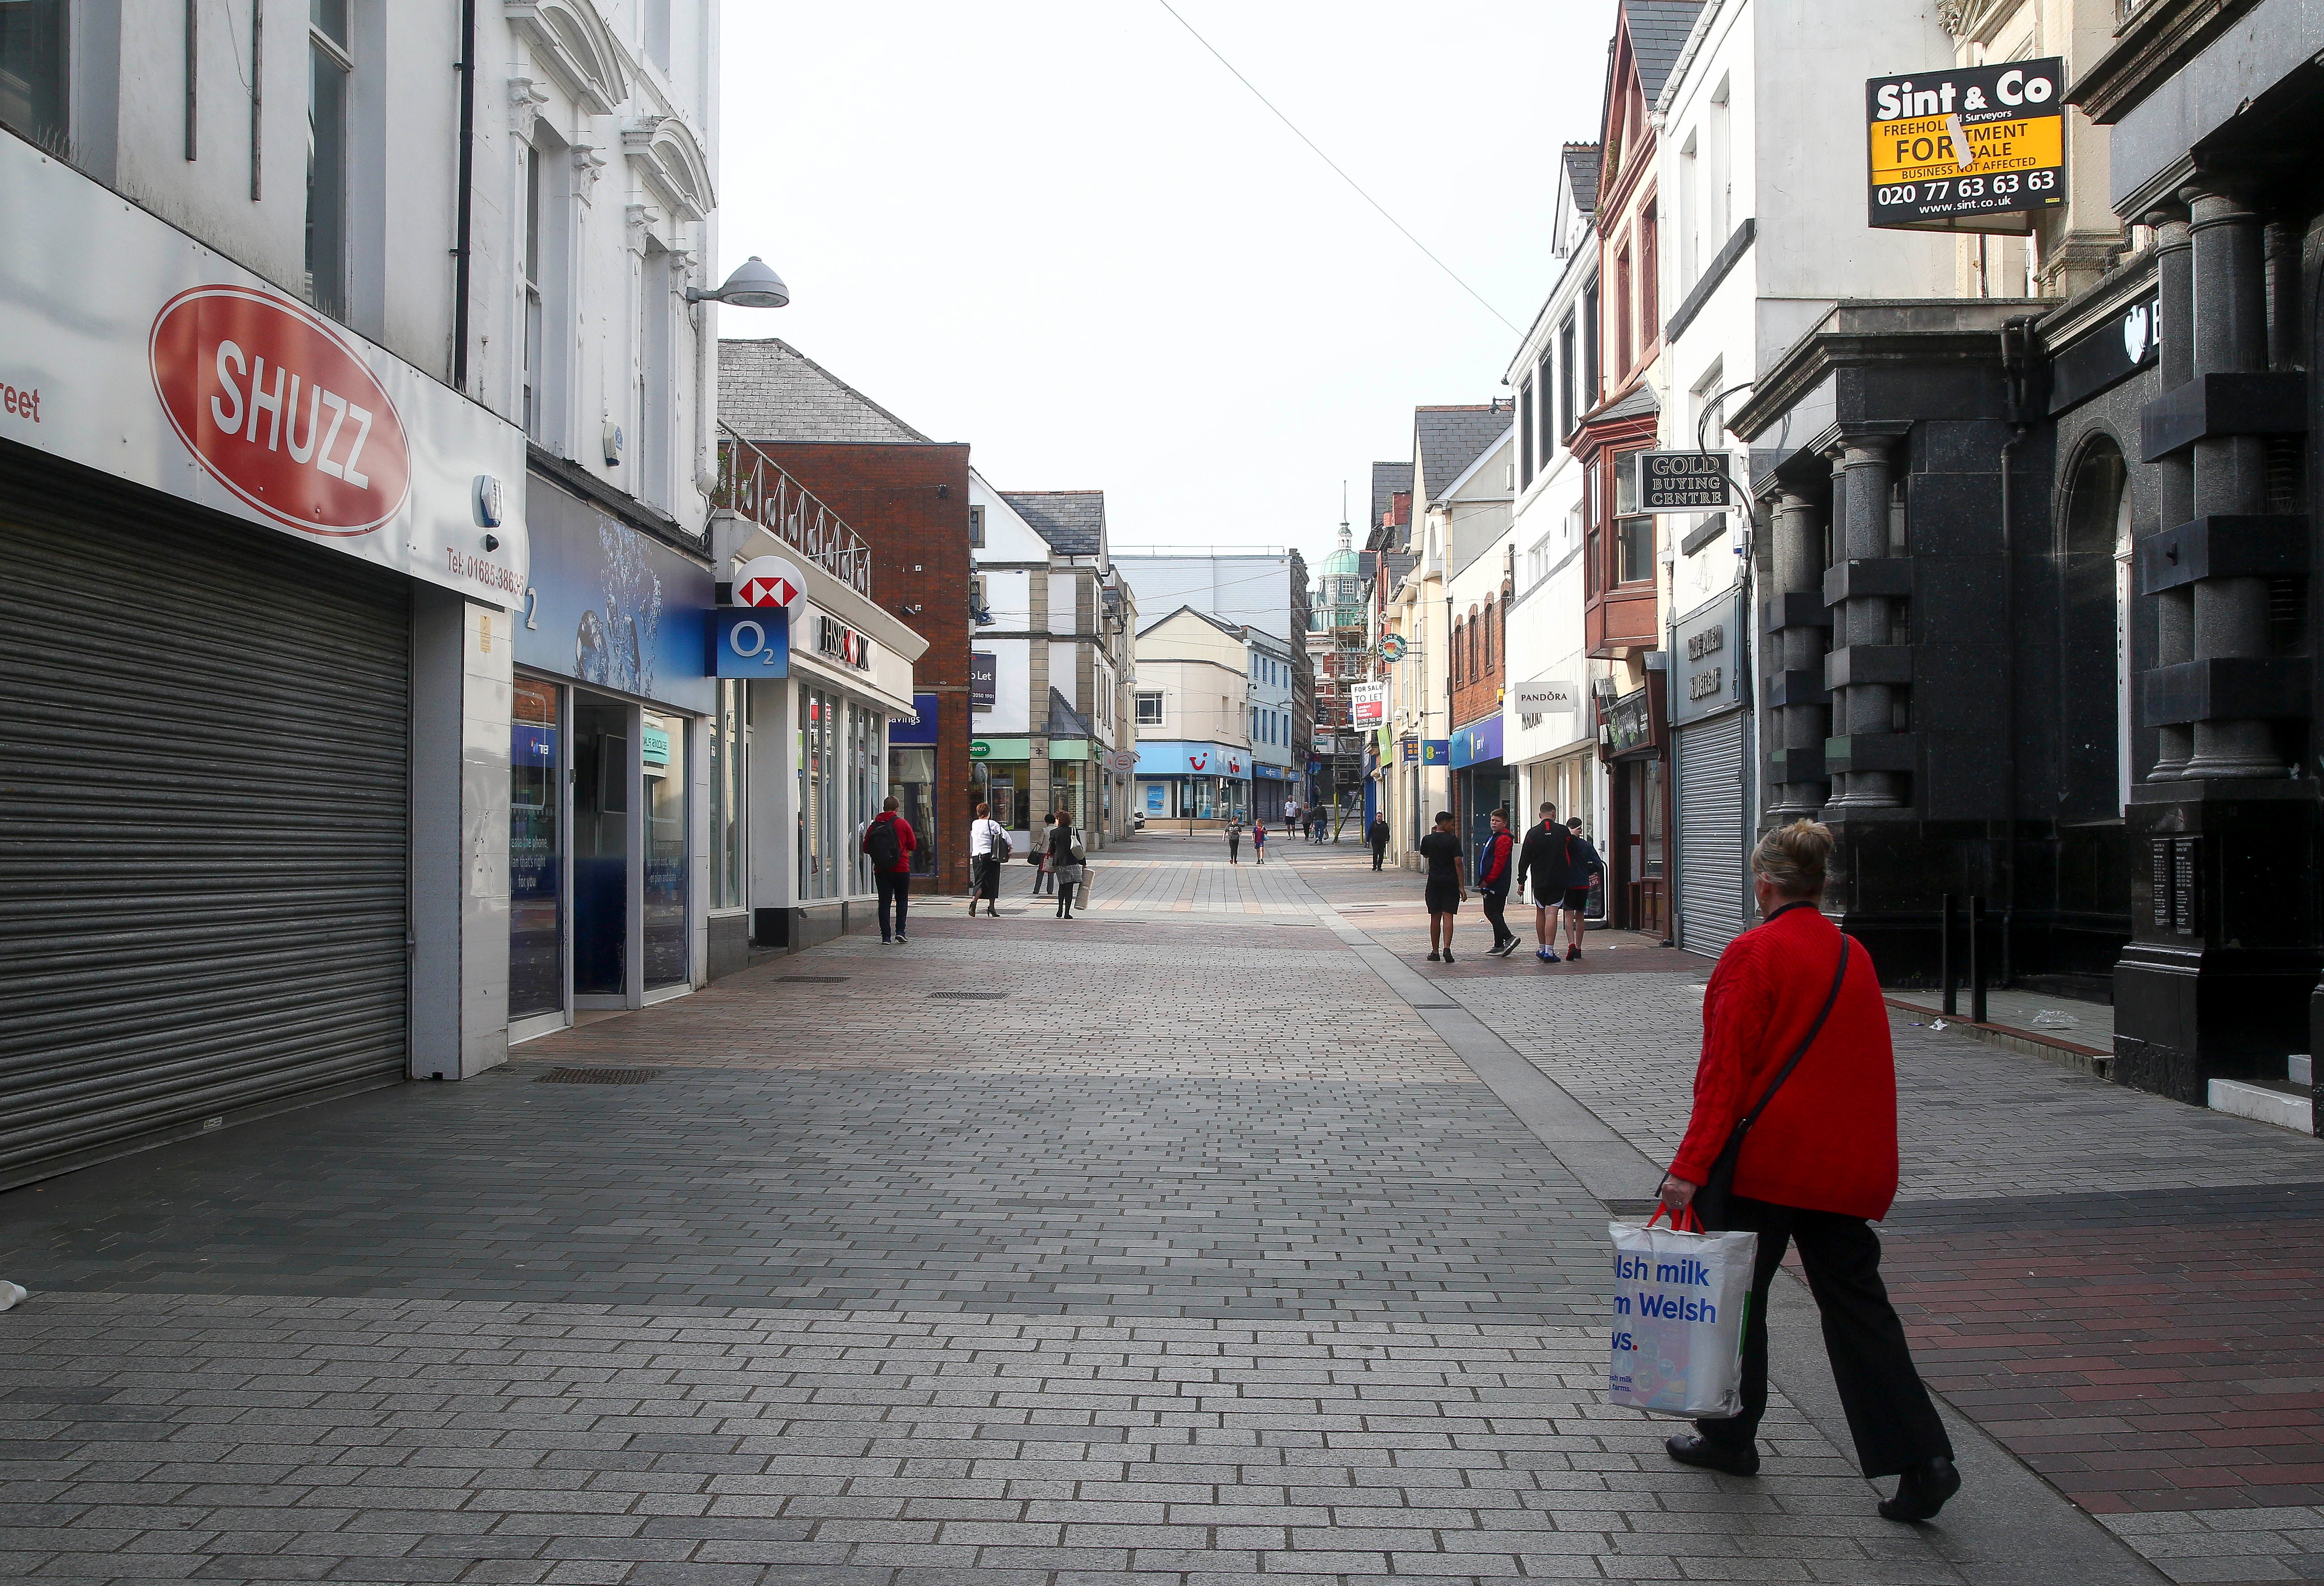 Merthyr Tydfil and other towns in the South Wales Valleys should be revitalised, jurors say